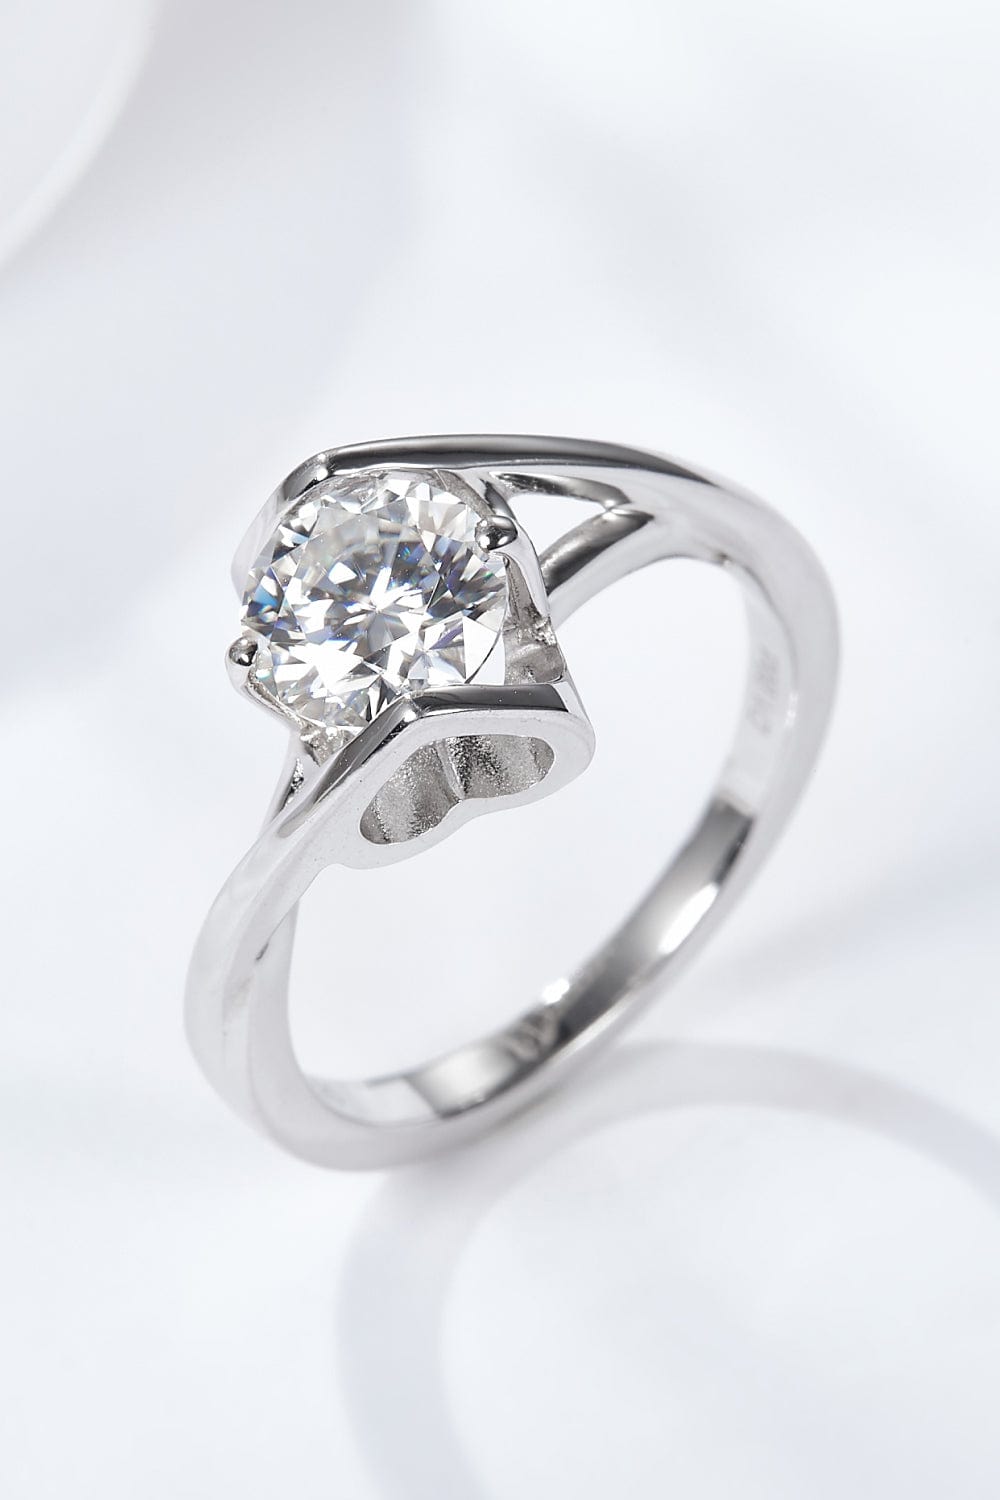 Get What You Need 1 Carat Moissanite Ring - Body By J'ne